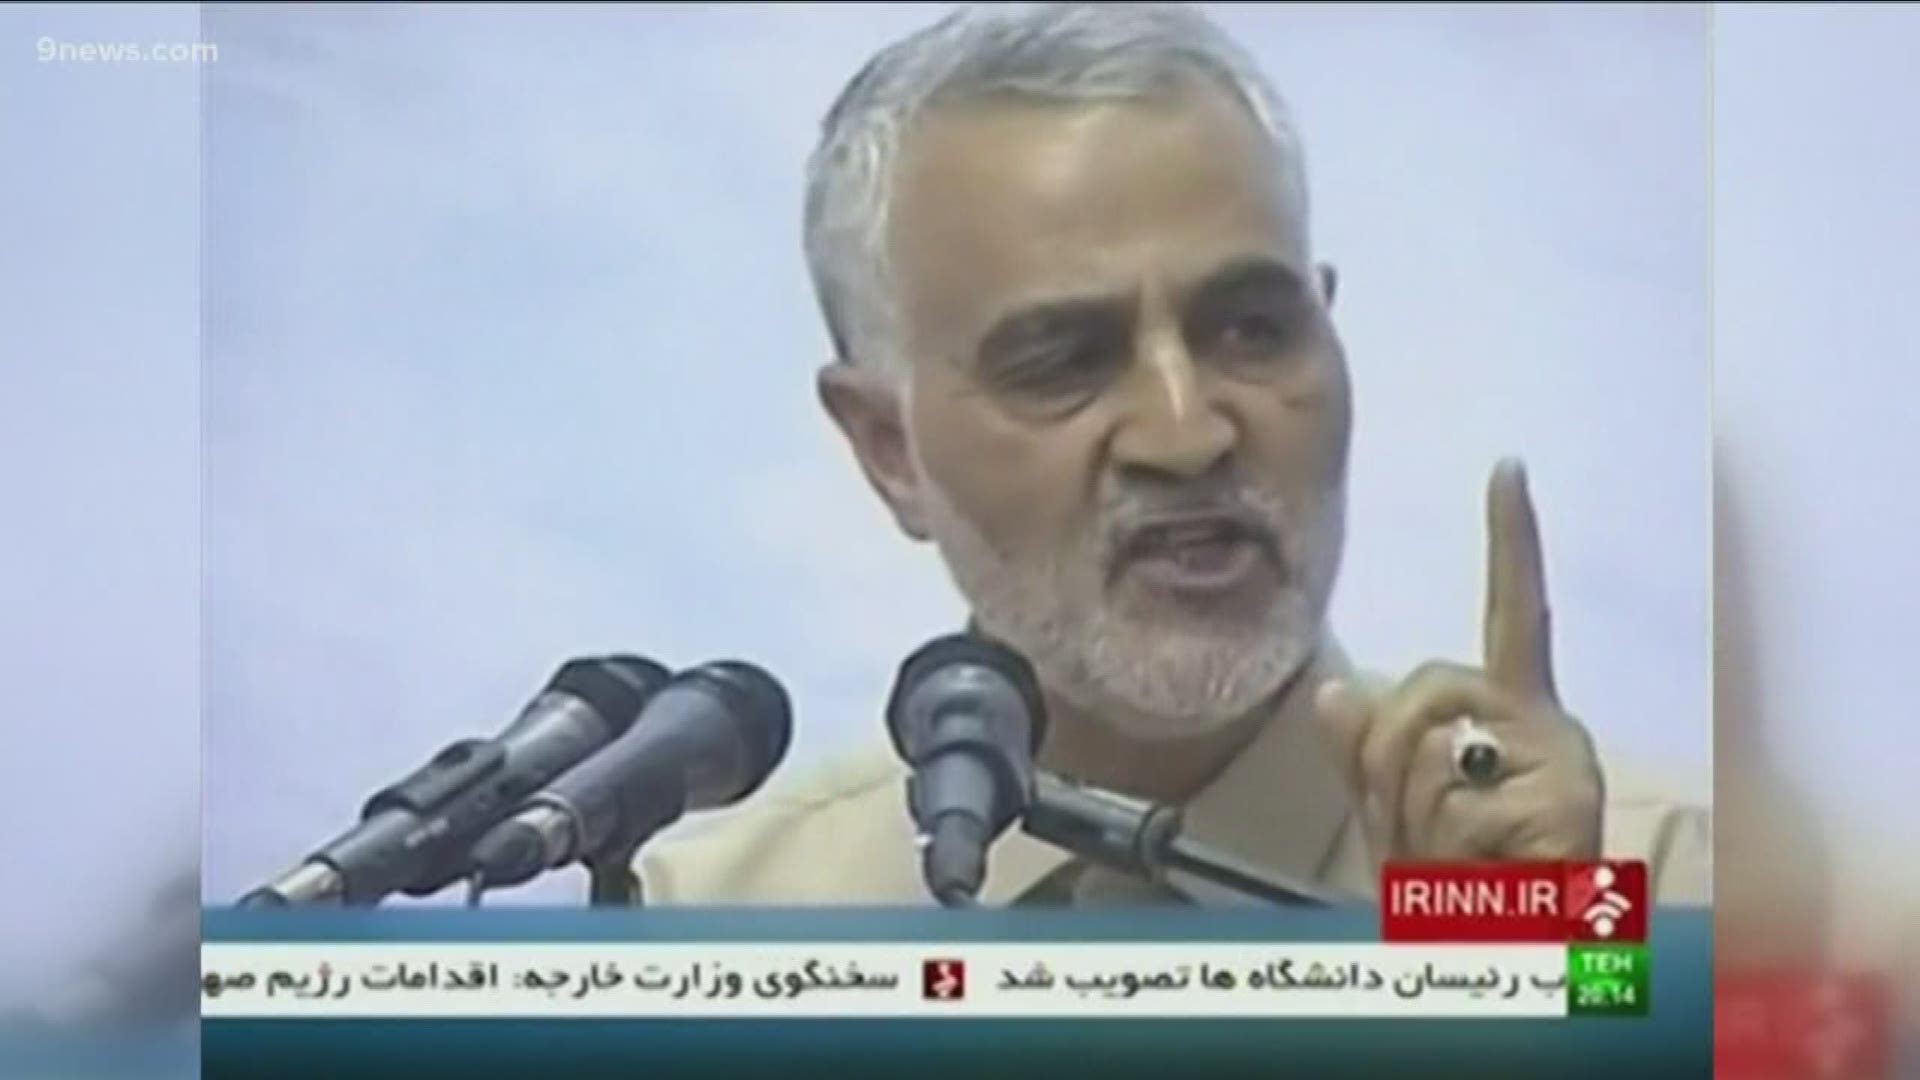 Iranian Major General Qasem Soleimani was killed in a US drone strike at the Baghdad airport. Now, Iran's Supreme Leader is promising "severe revenge."